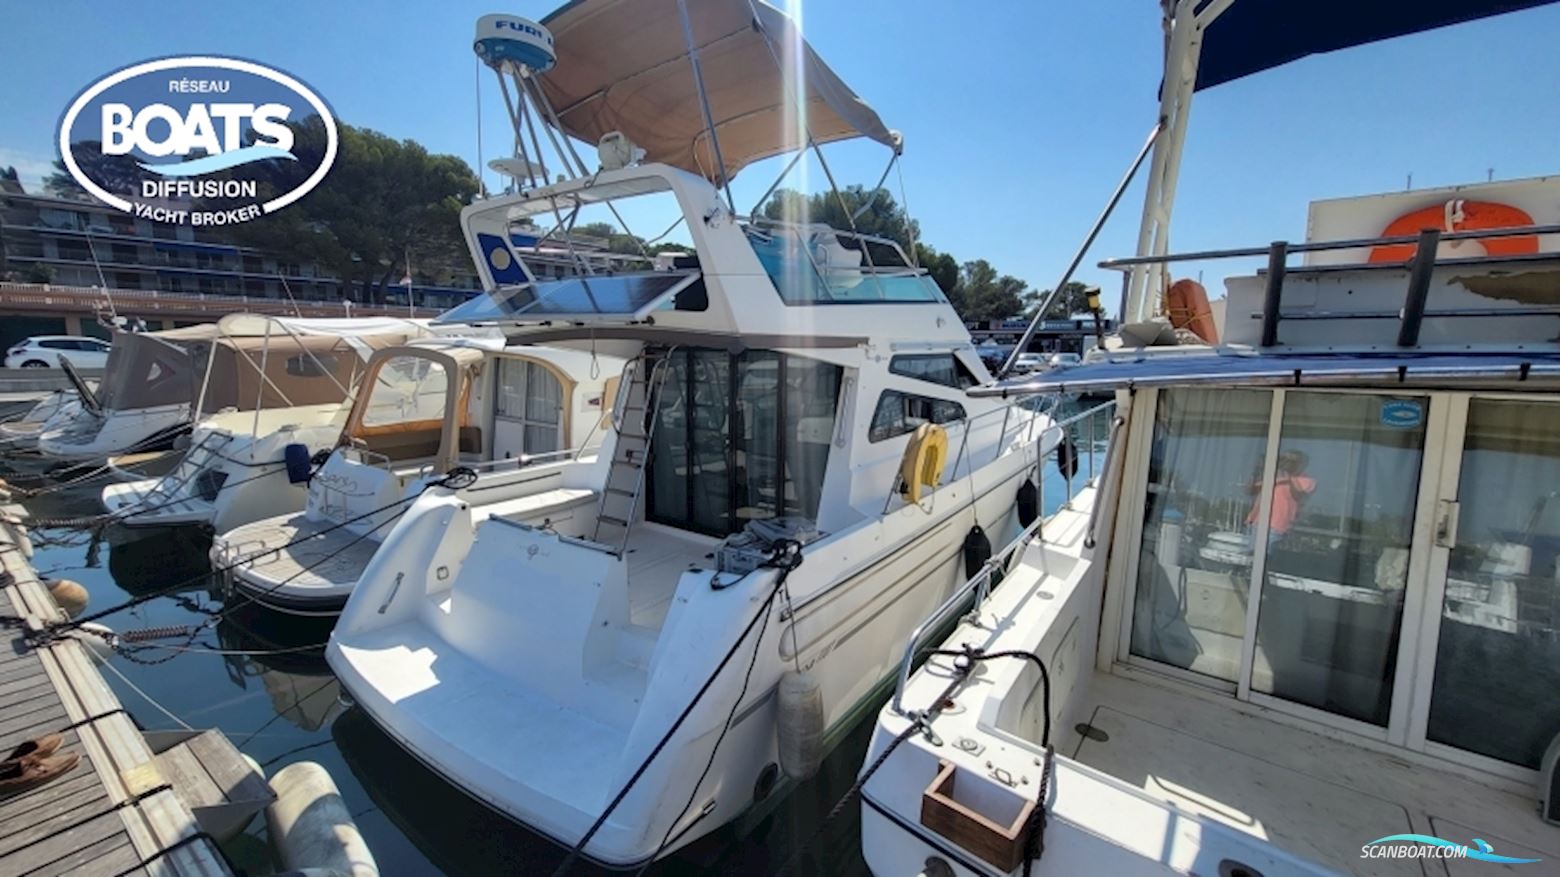 Arcoa 1107 Motor boat 1997, with Iveco engine, France